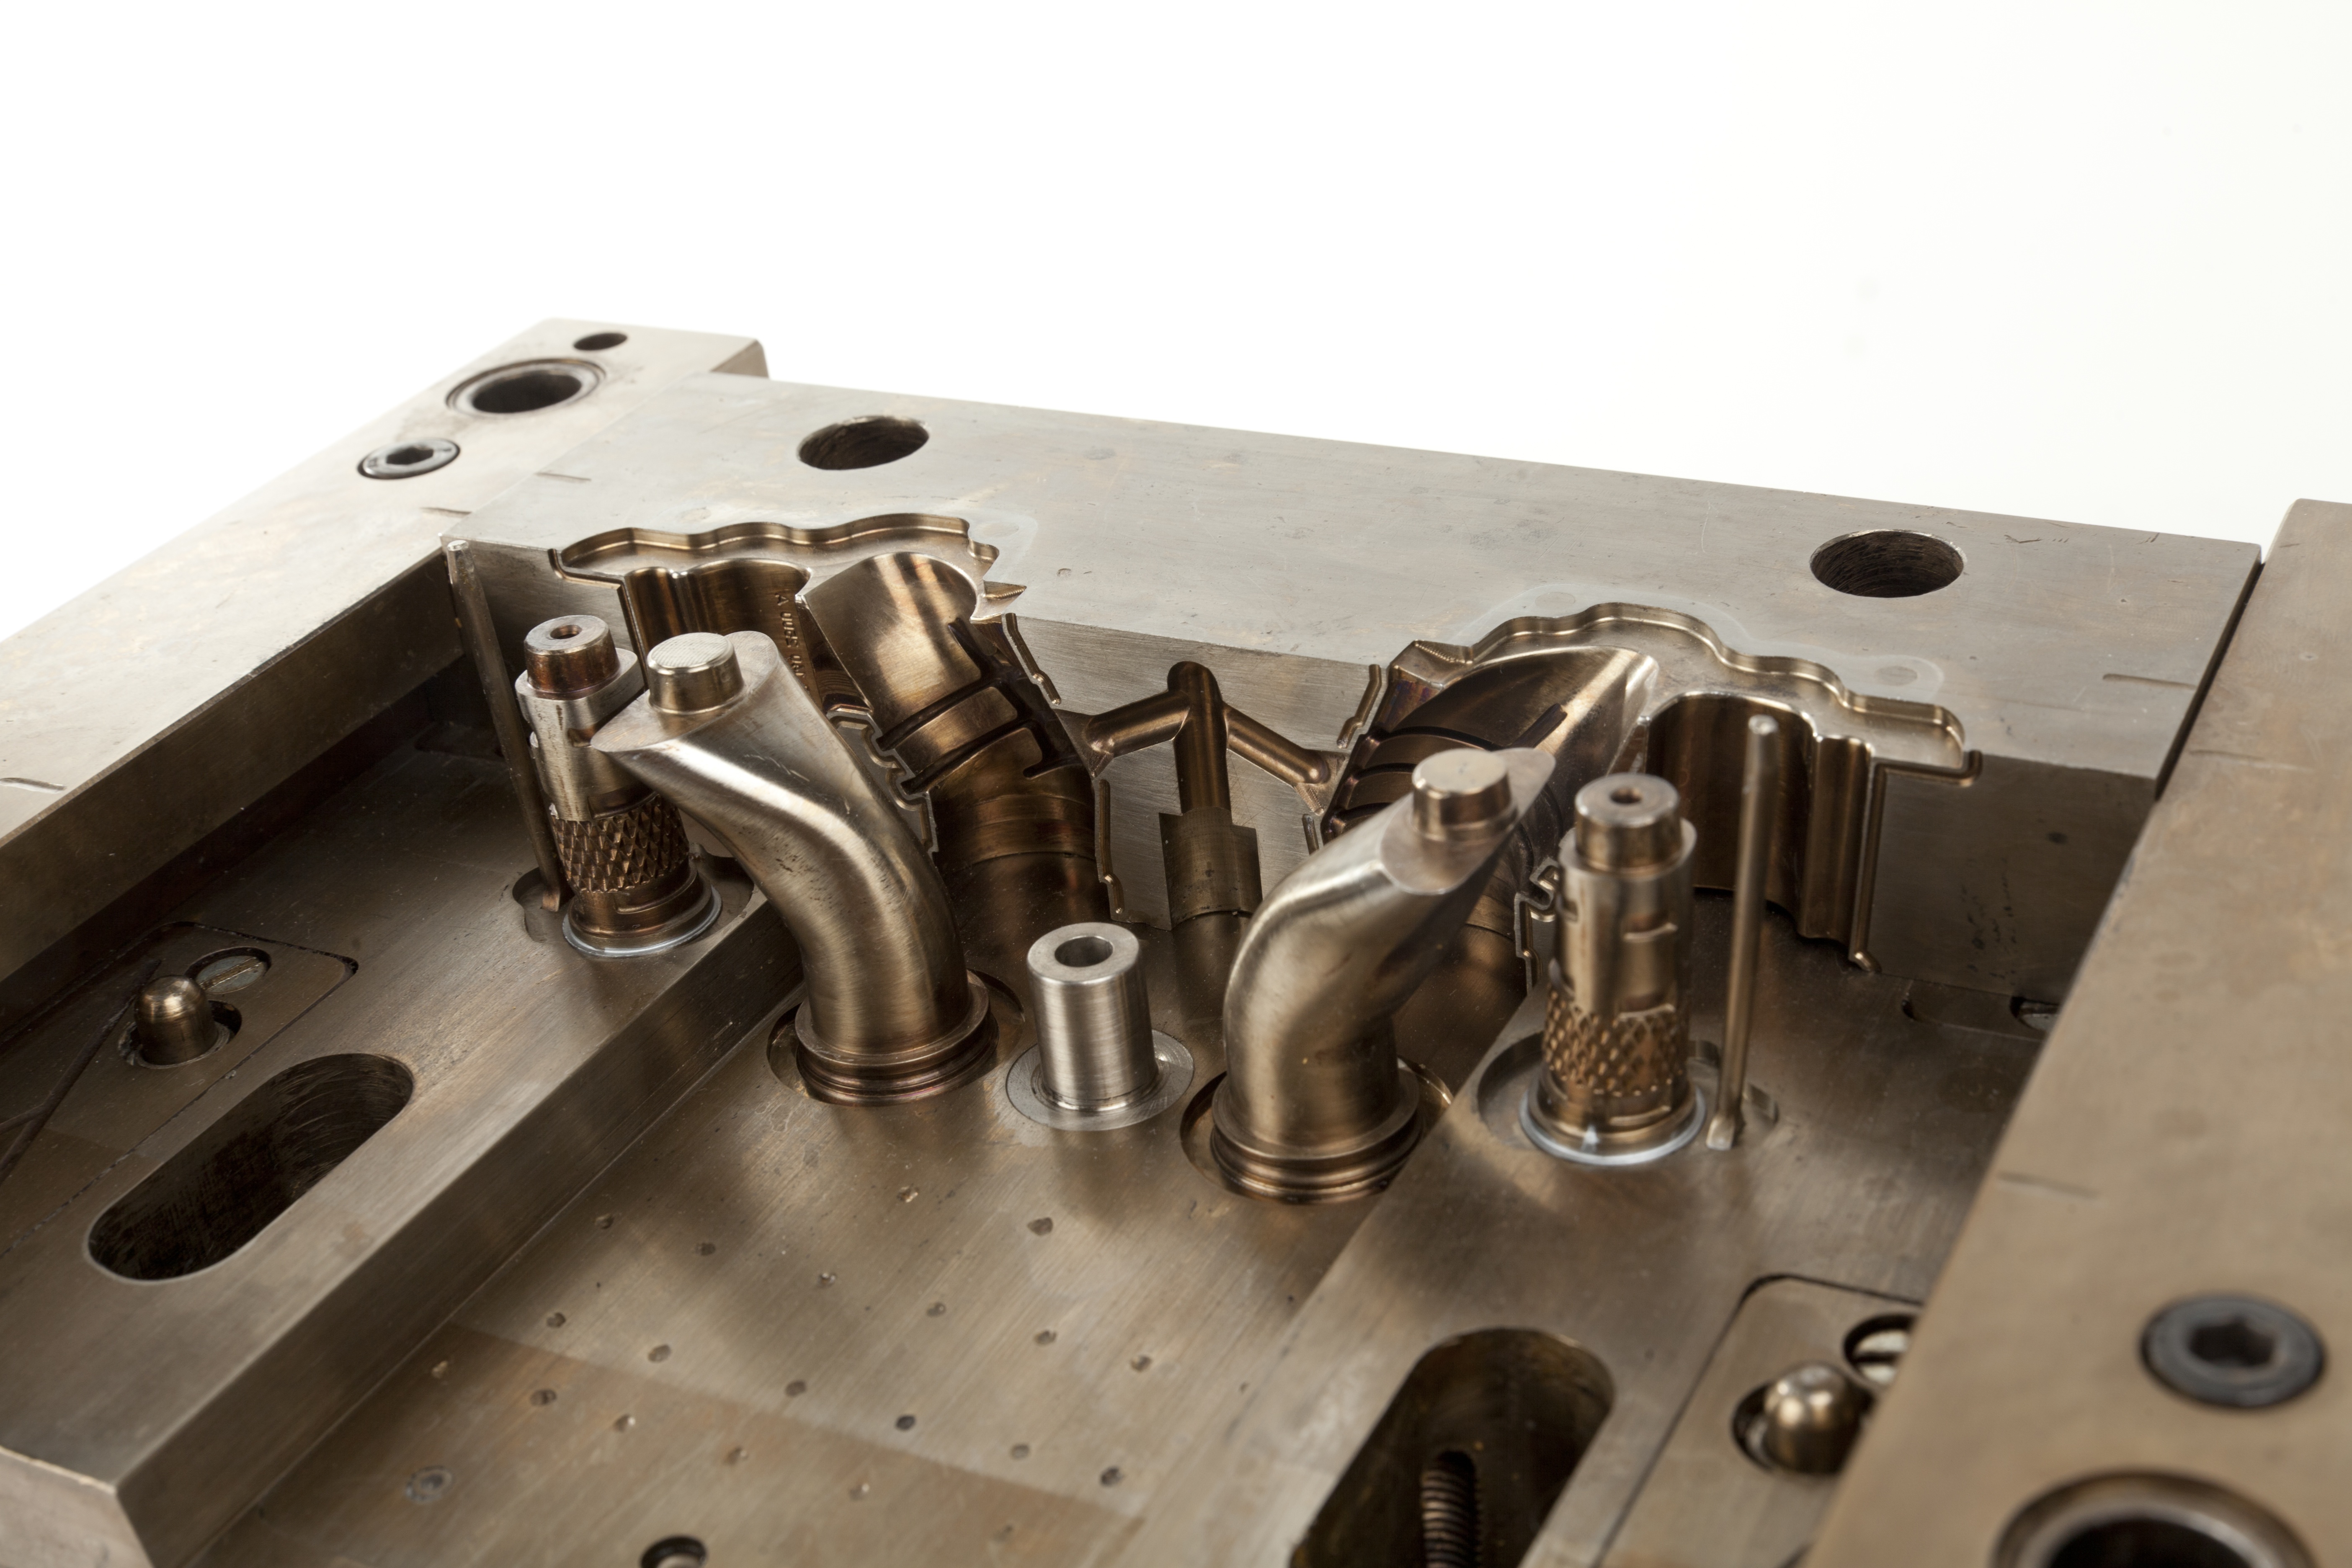 Metal Injection Moulding